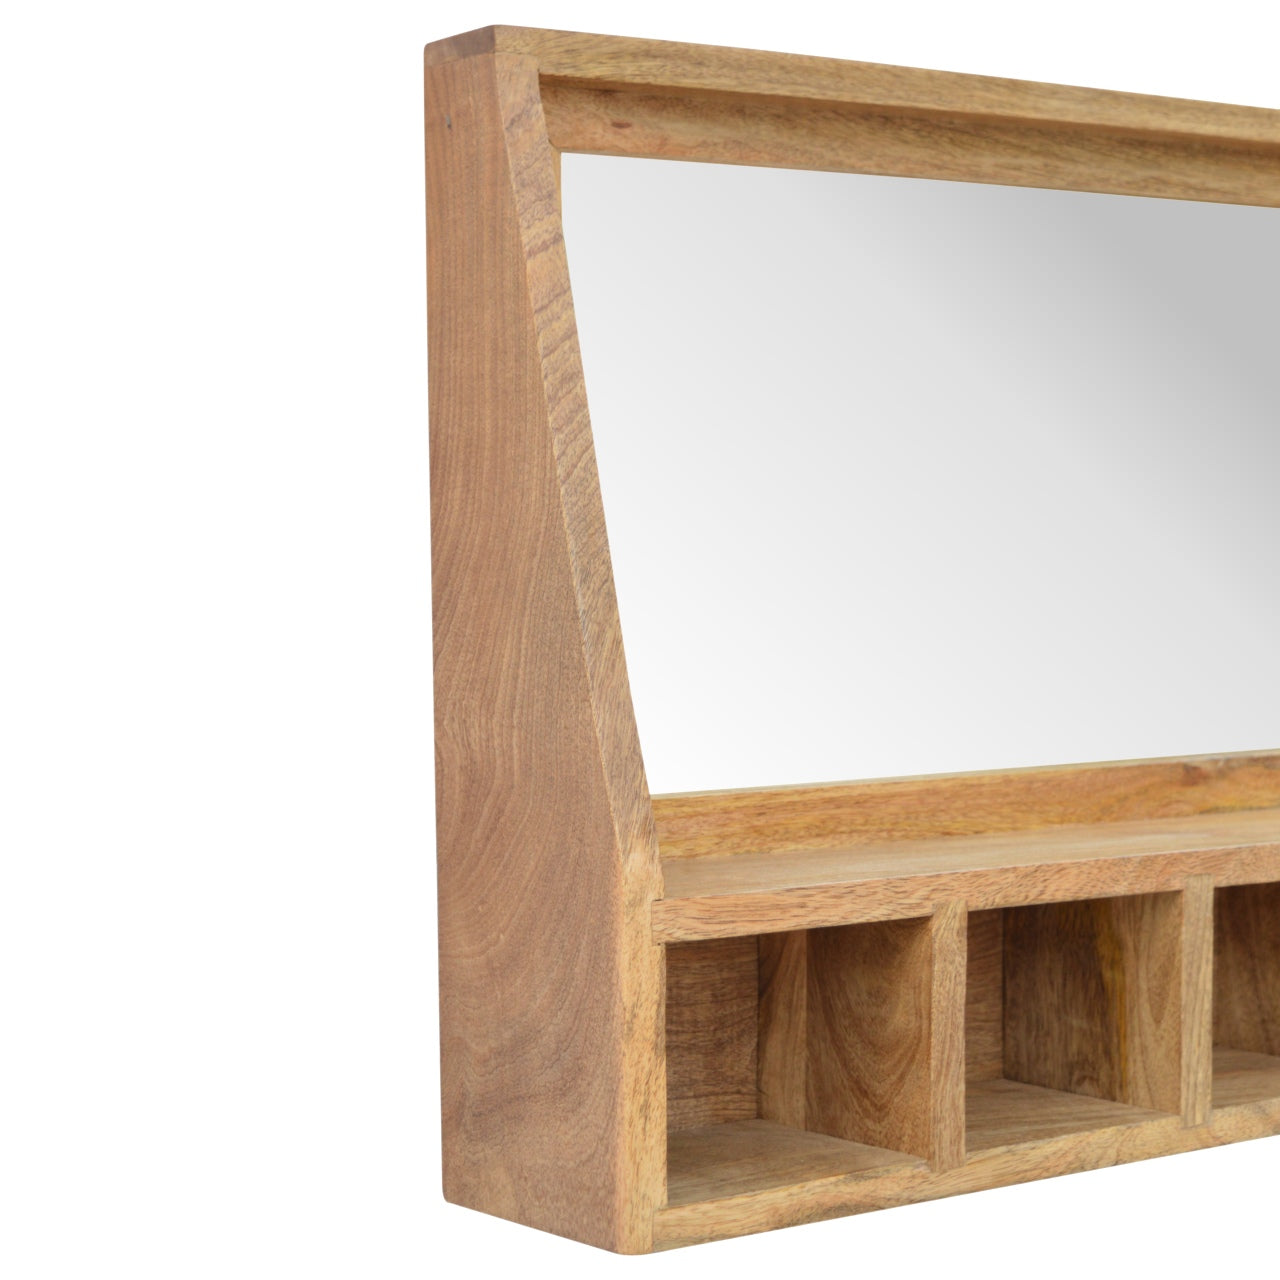 5 Slot Wall Mounted Mirror - mancavesuperstore